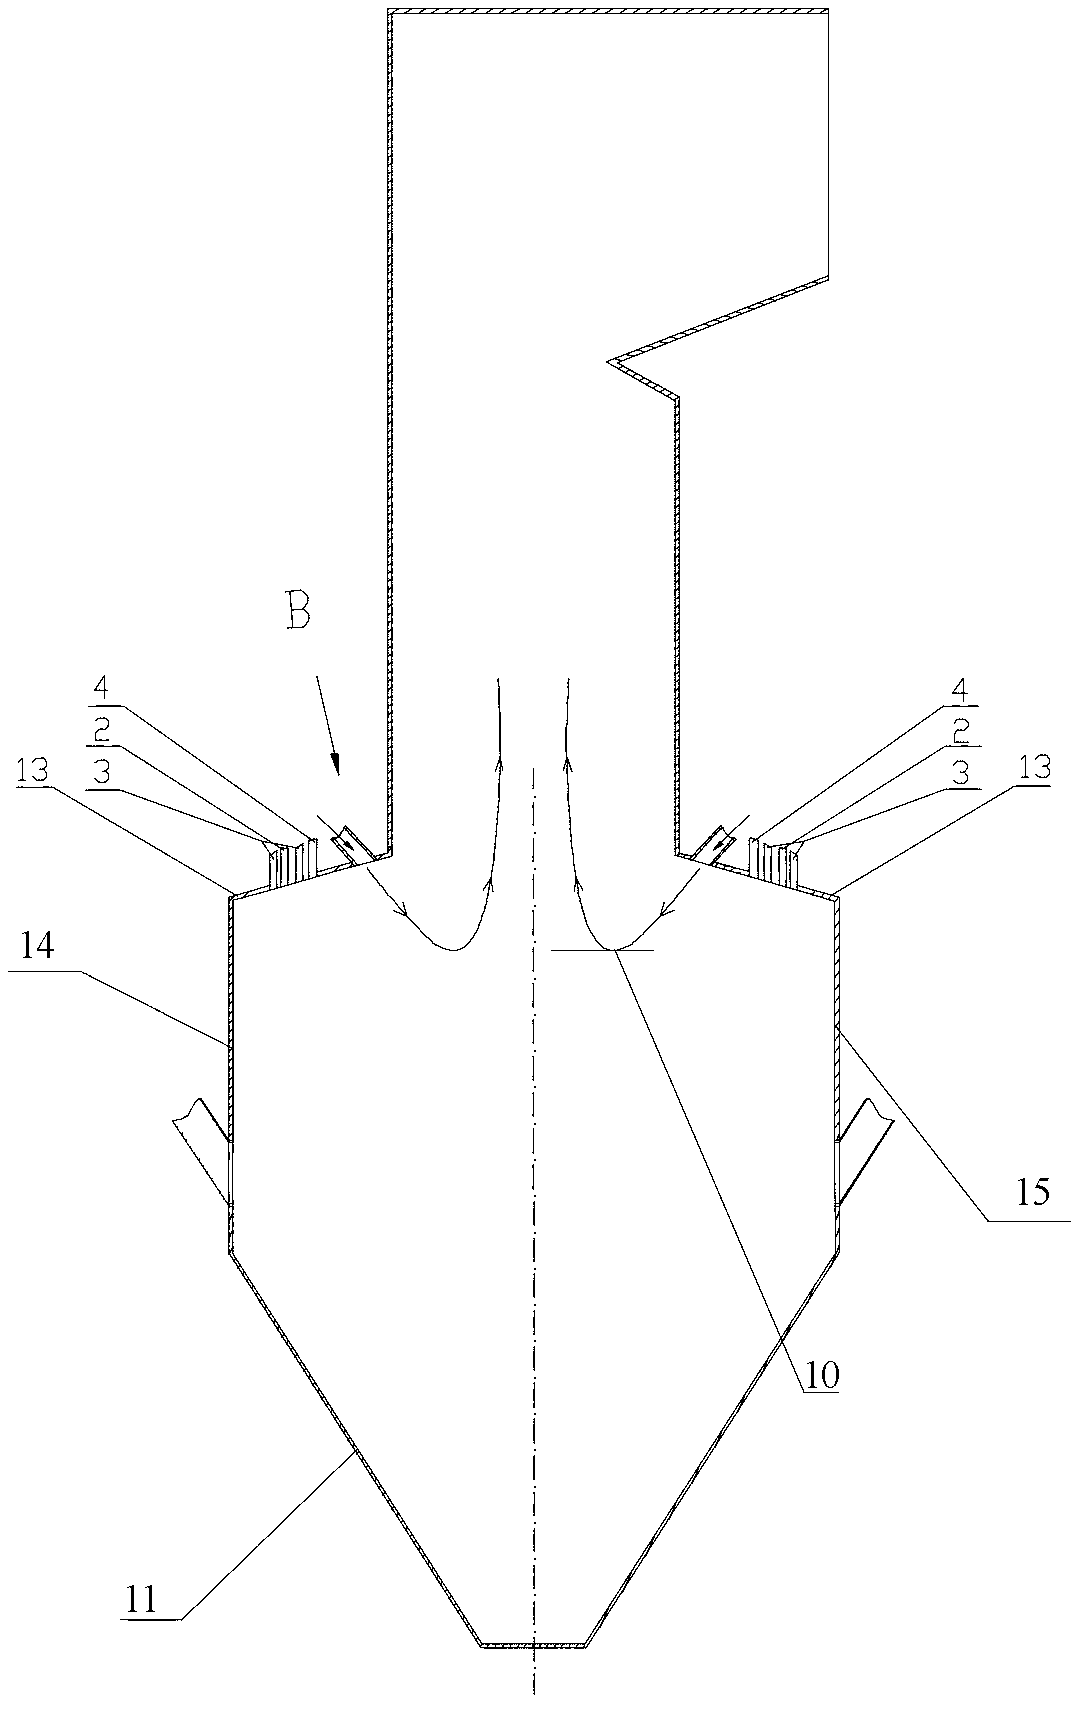 W-shaped flame boiler gap type OFA (over fire air) device arranged above arch wing wall